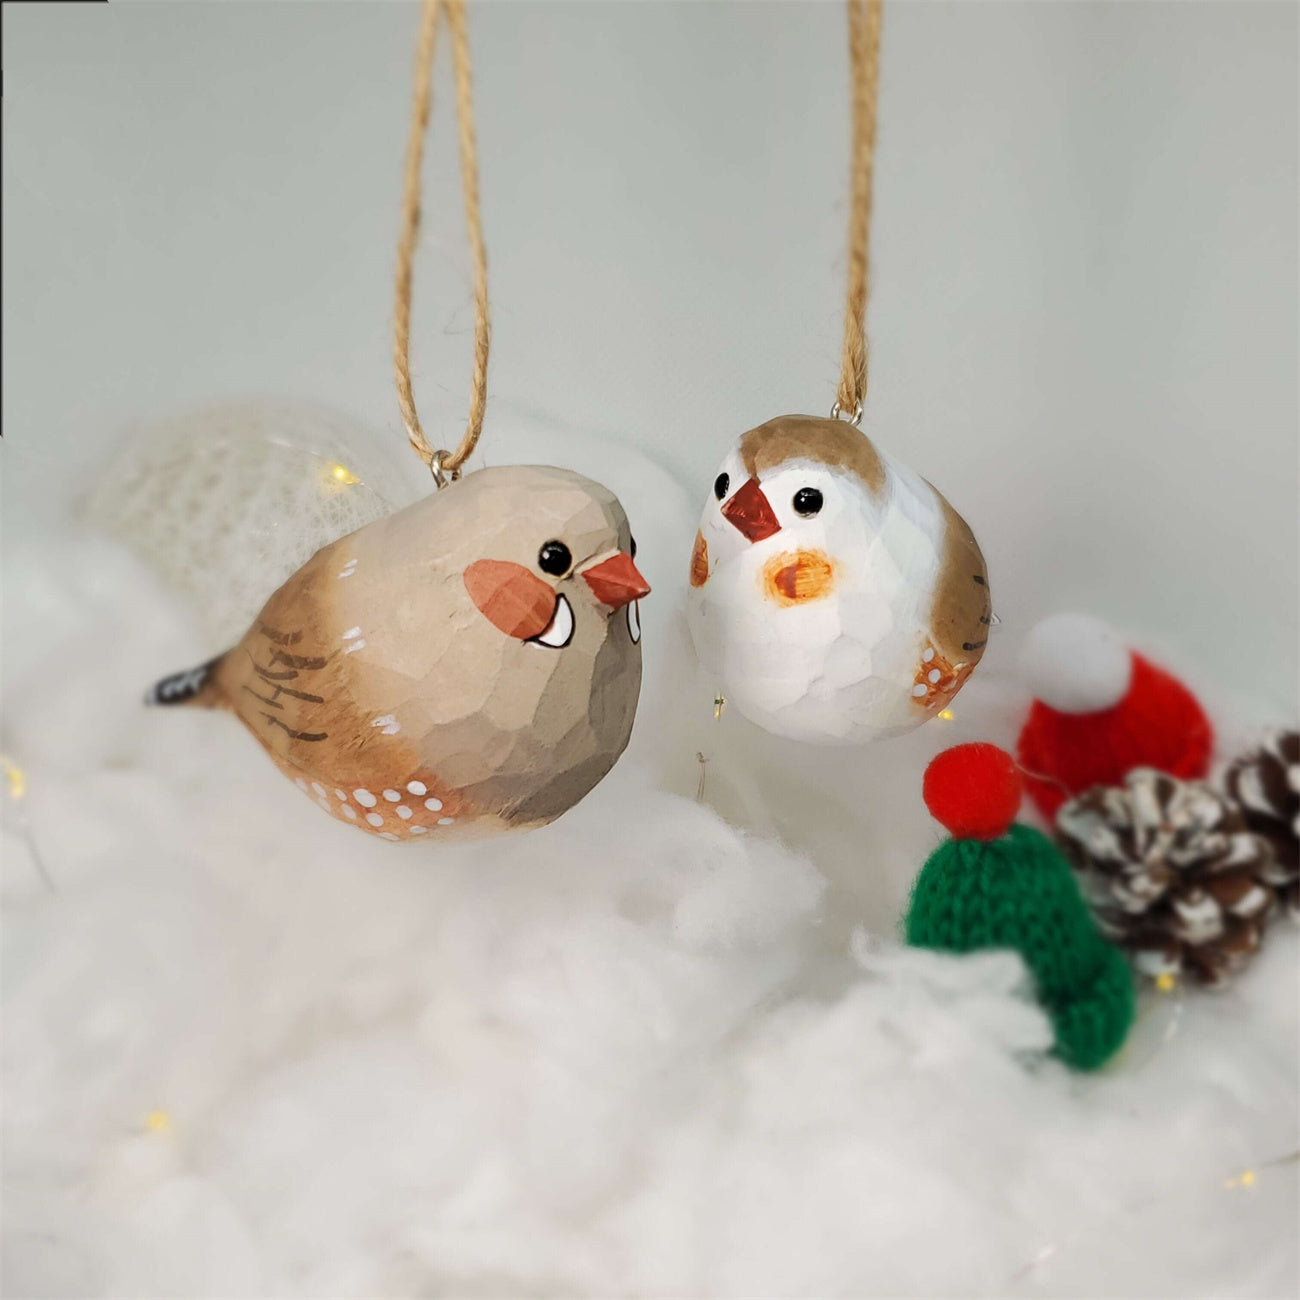 Zebra Finch Carved and Painted Wooden Bird Ornaments